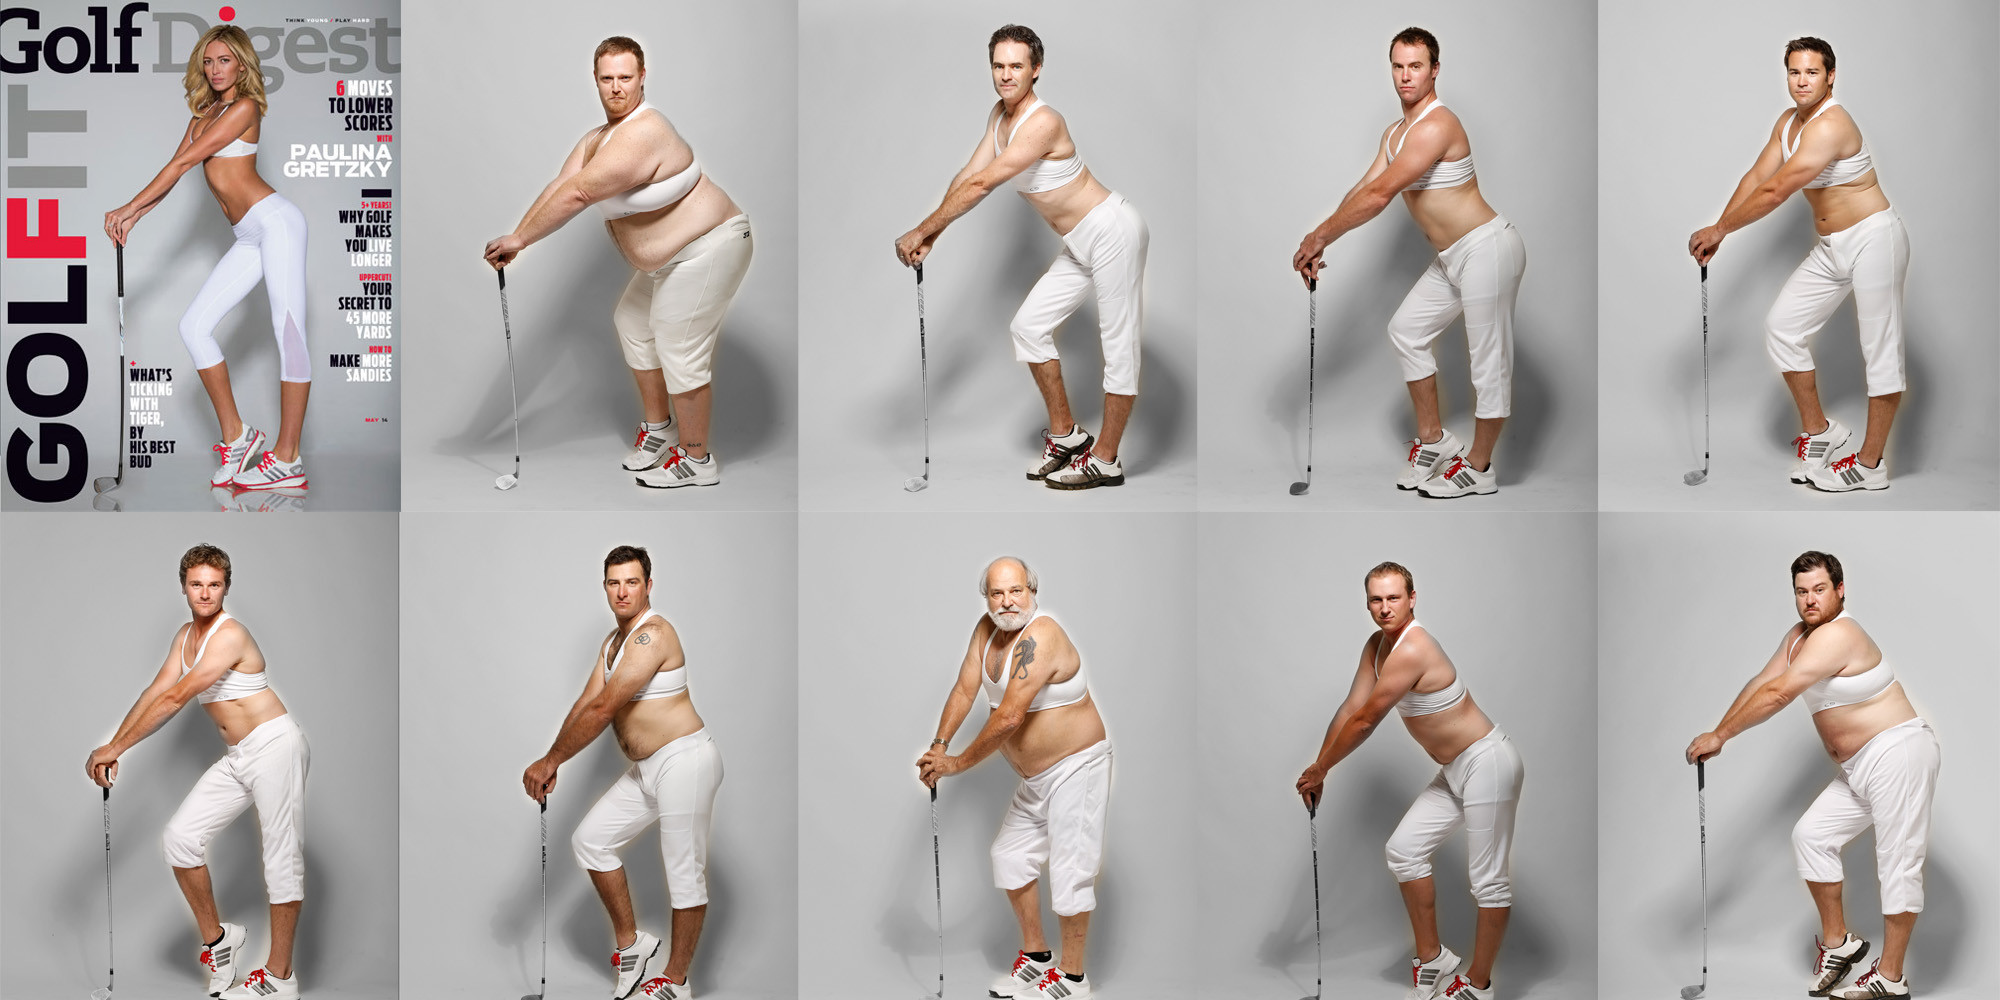 Paulina Gretzkys Golf Digest Cover Gets Spoofed By Middled Aged Men